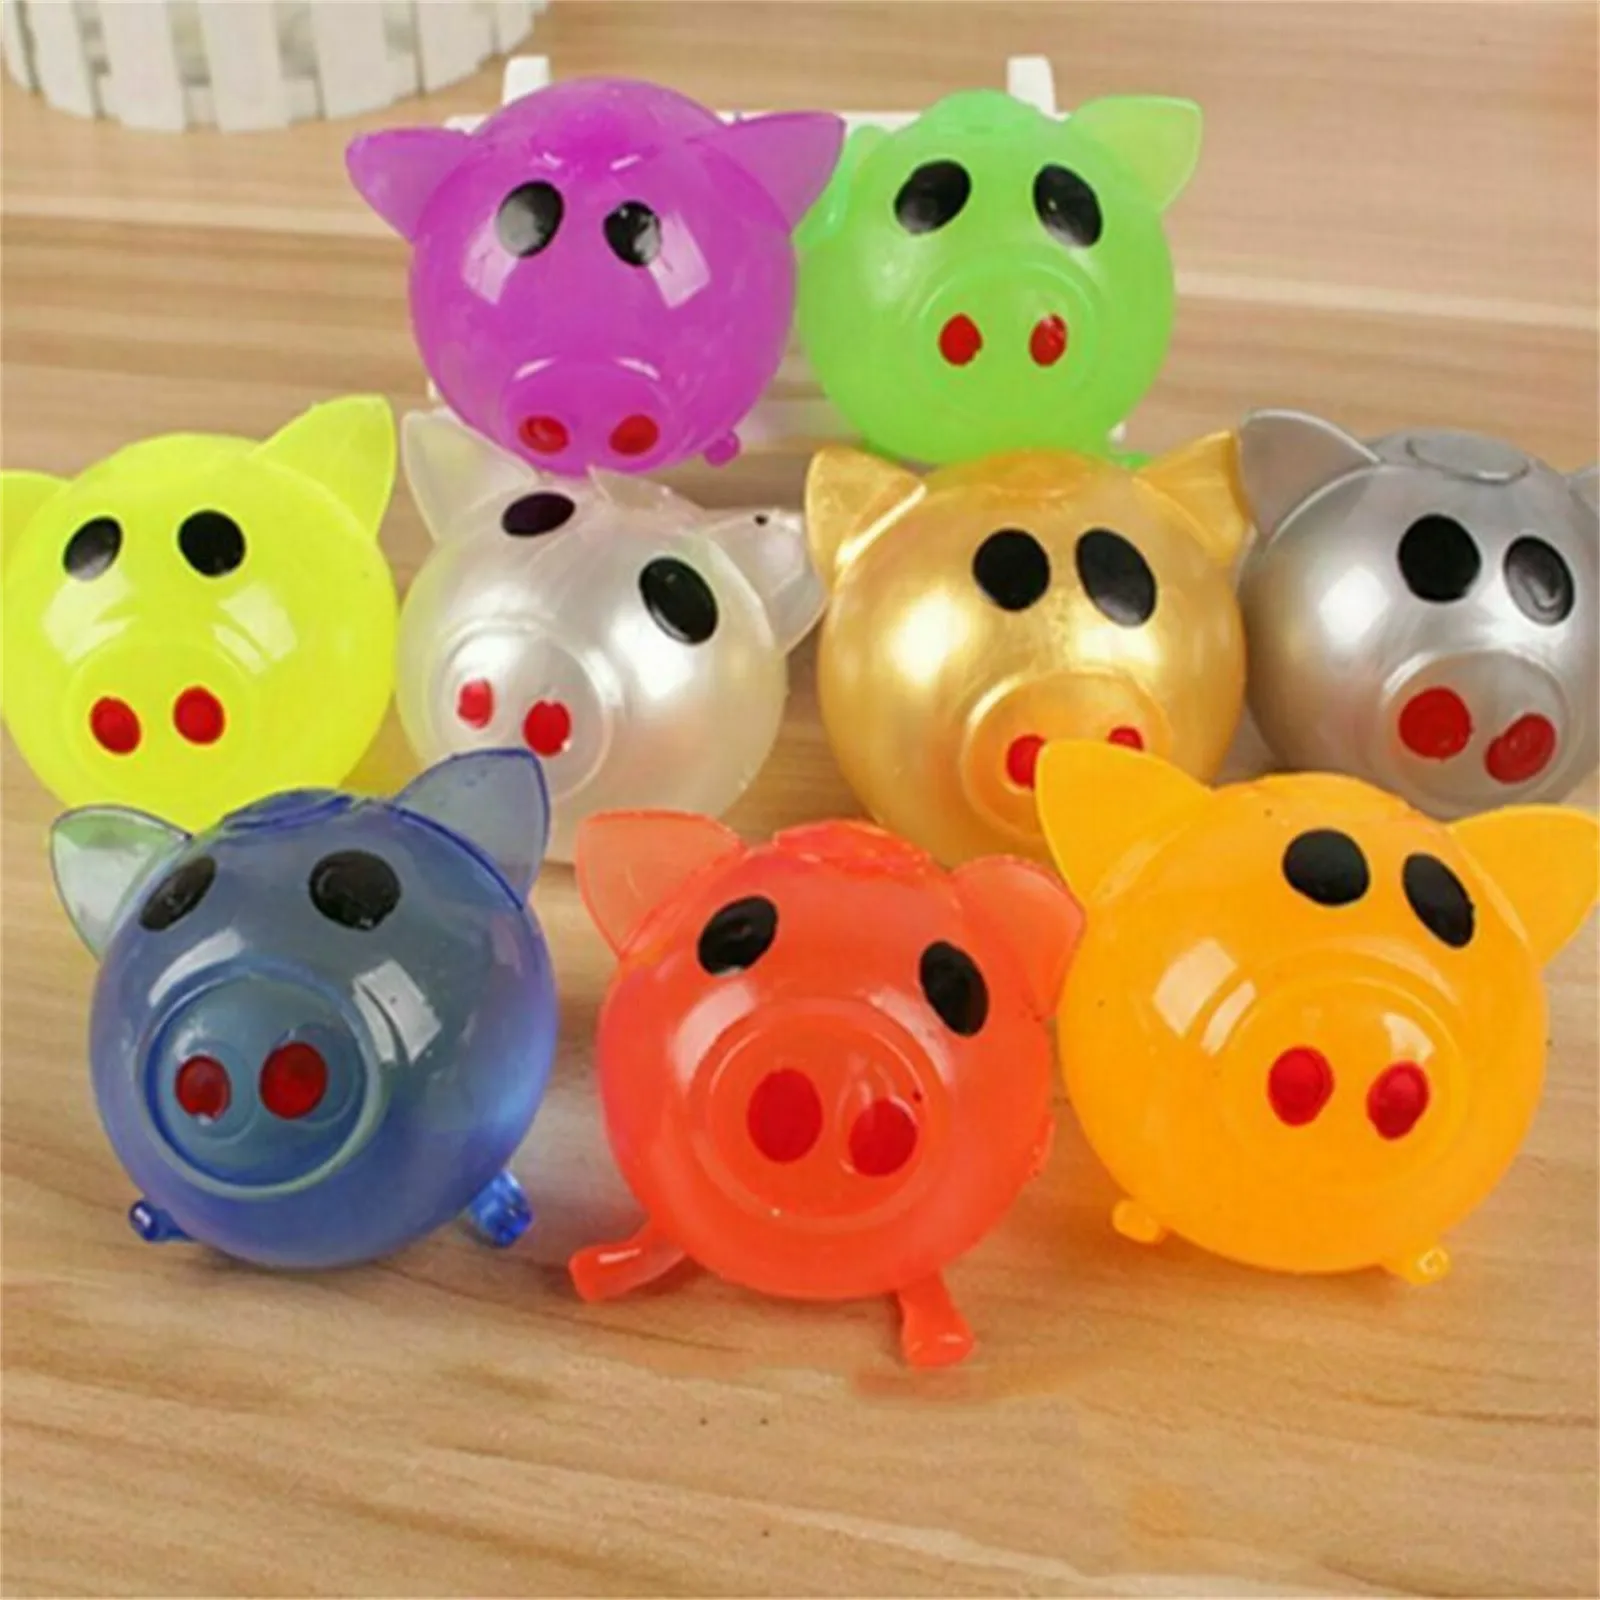 

Anti Stress Goods Various Types Pig Head Toys Decompression Splat Ball Vent Toy Venting Ball Sticky Smash Vent Ball Water Ball